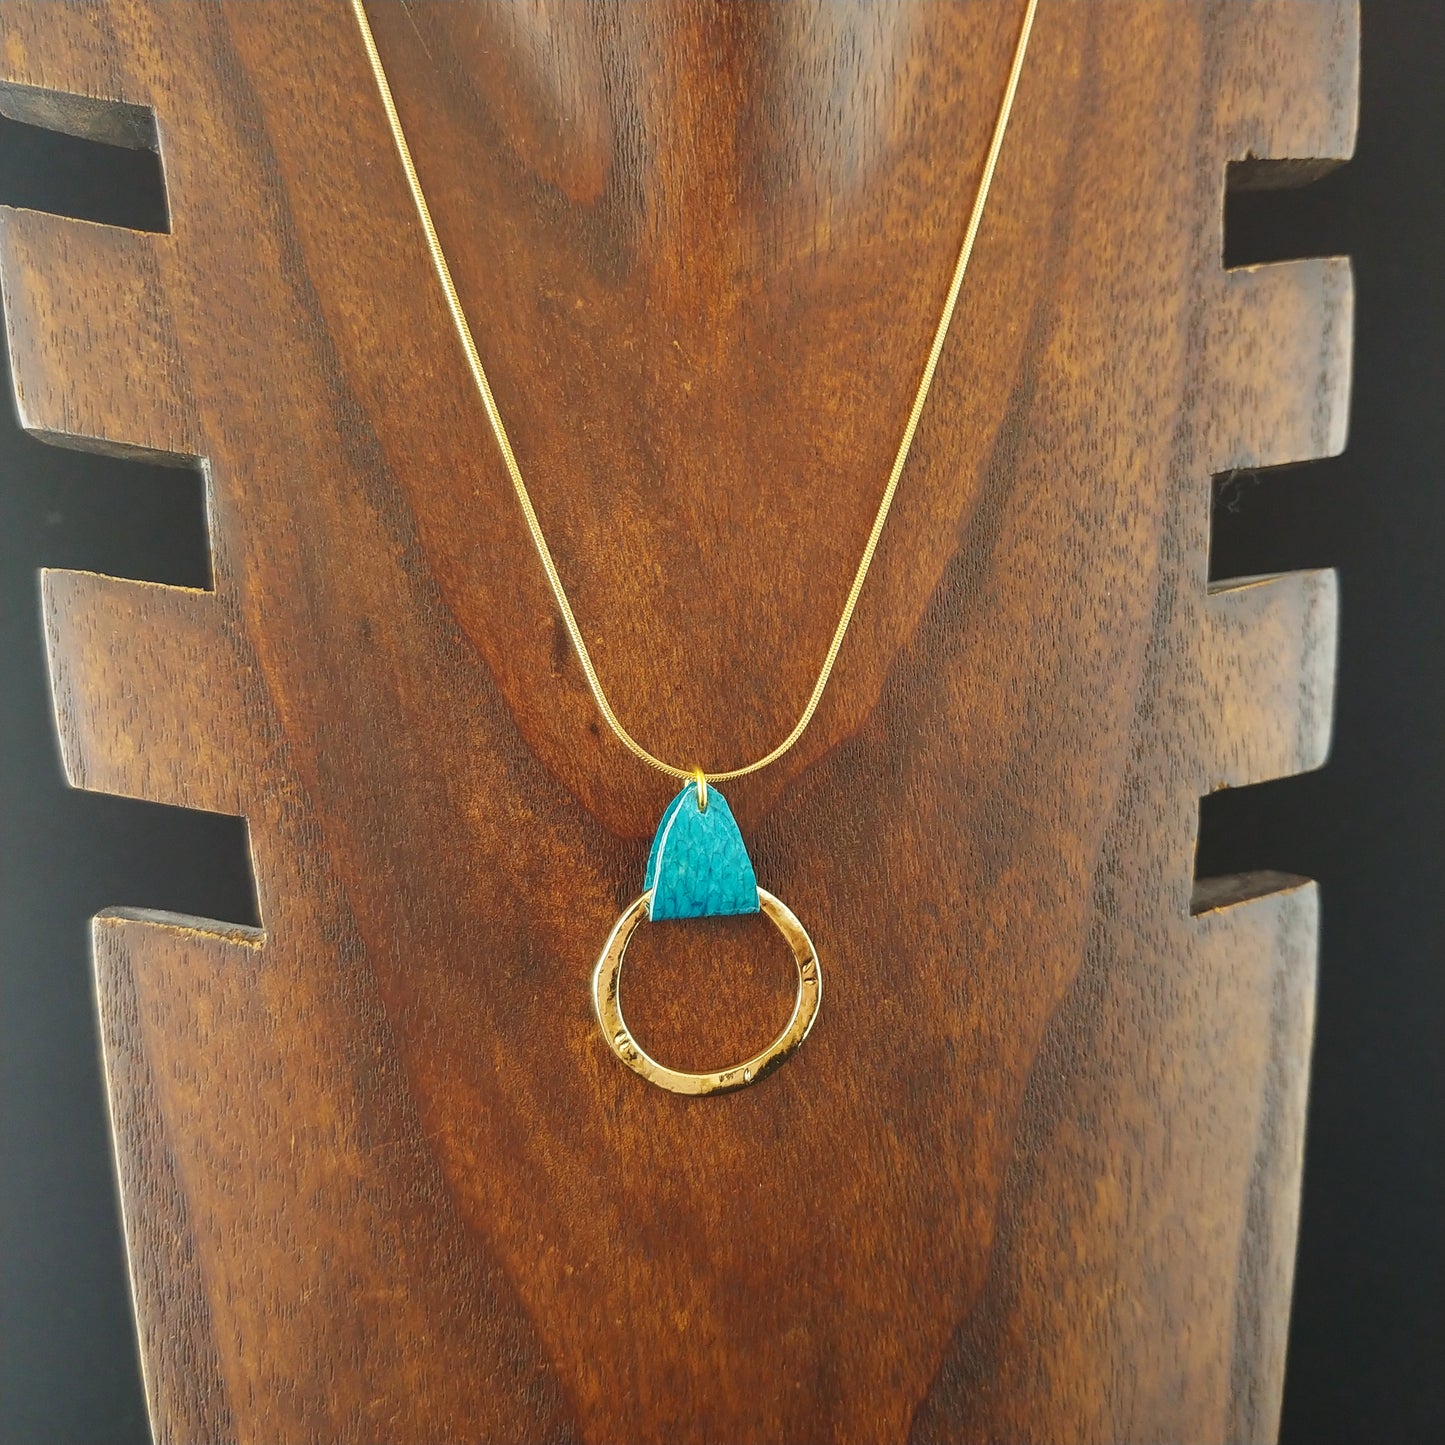 Blue Salmon Leather Golden Circle Necklace - Icelandic Fish Leather Jewelry - Handmade in Iceland